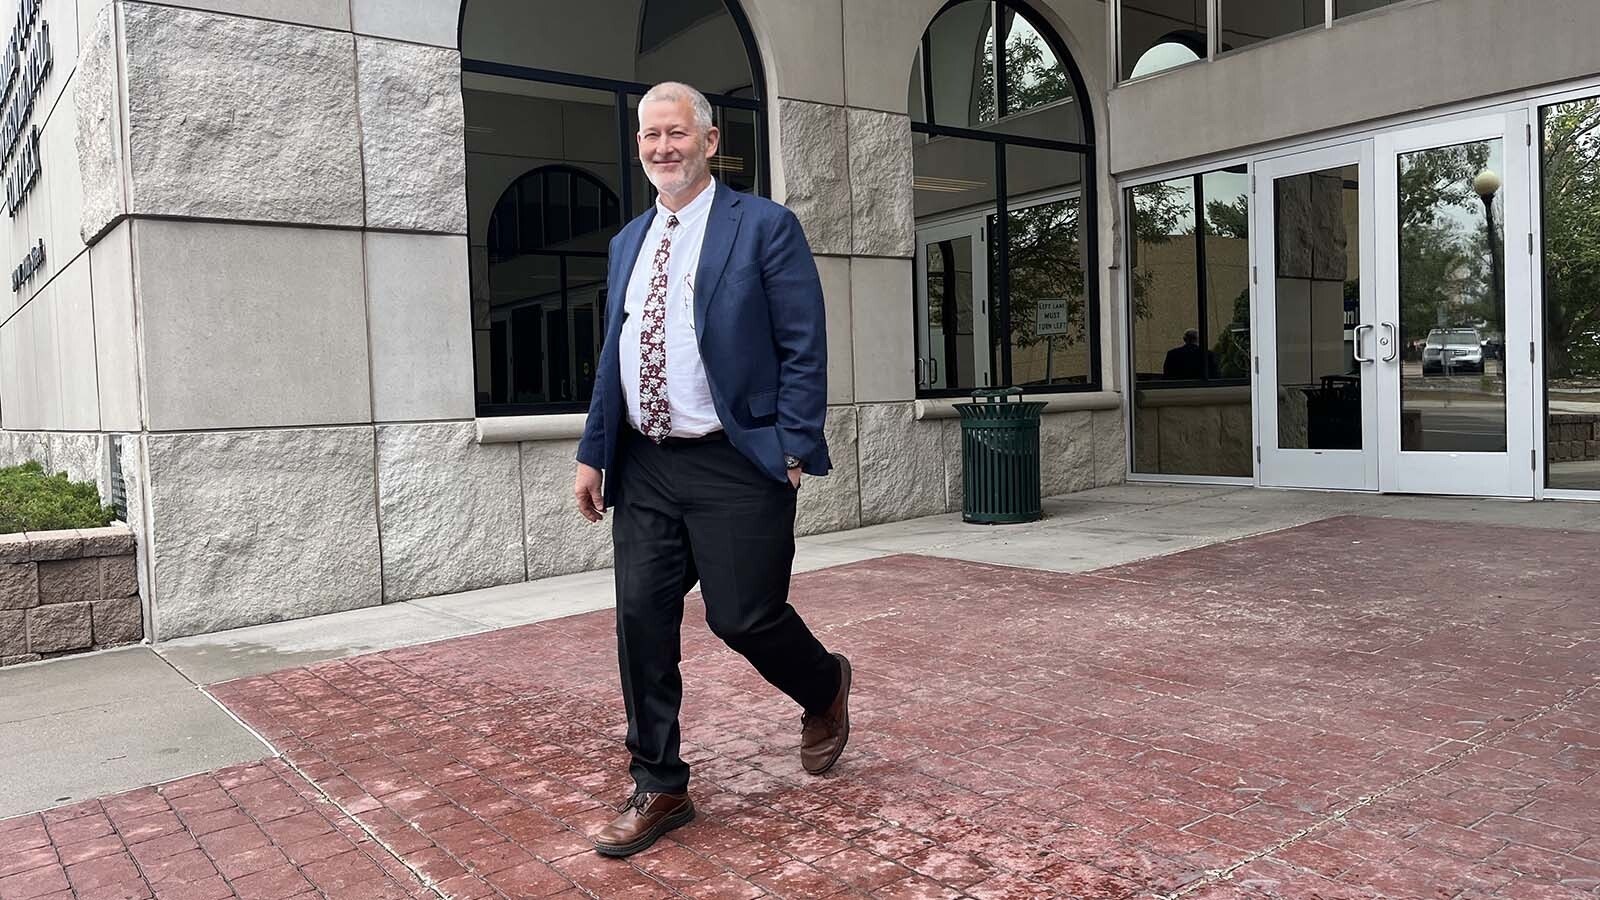 Former Wyoming Superintendent of Public Instruction Brian Schroeder walks out of the Laramie County courthouse and government complex in downtown Cheyenne on Thursday.